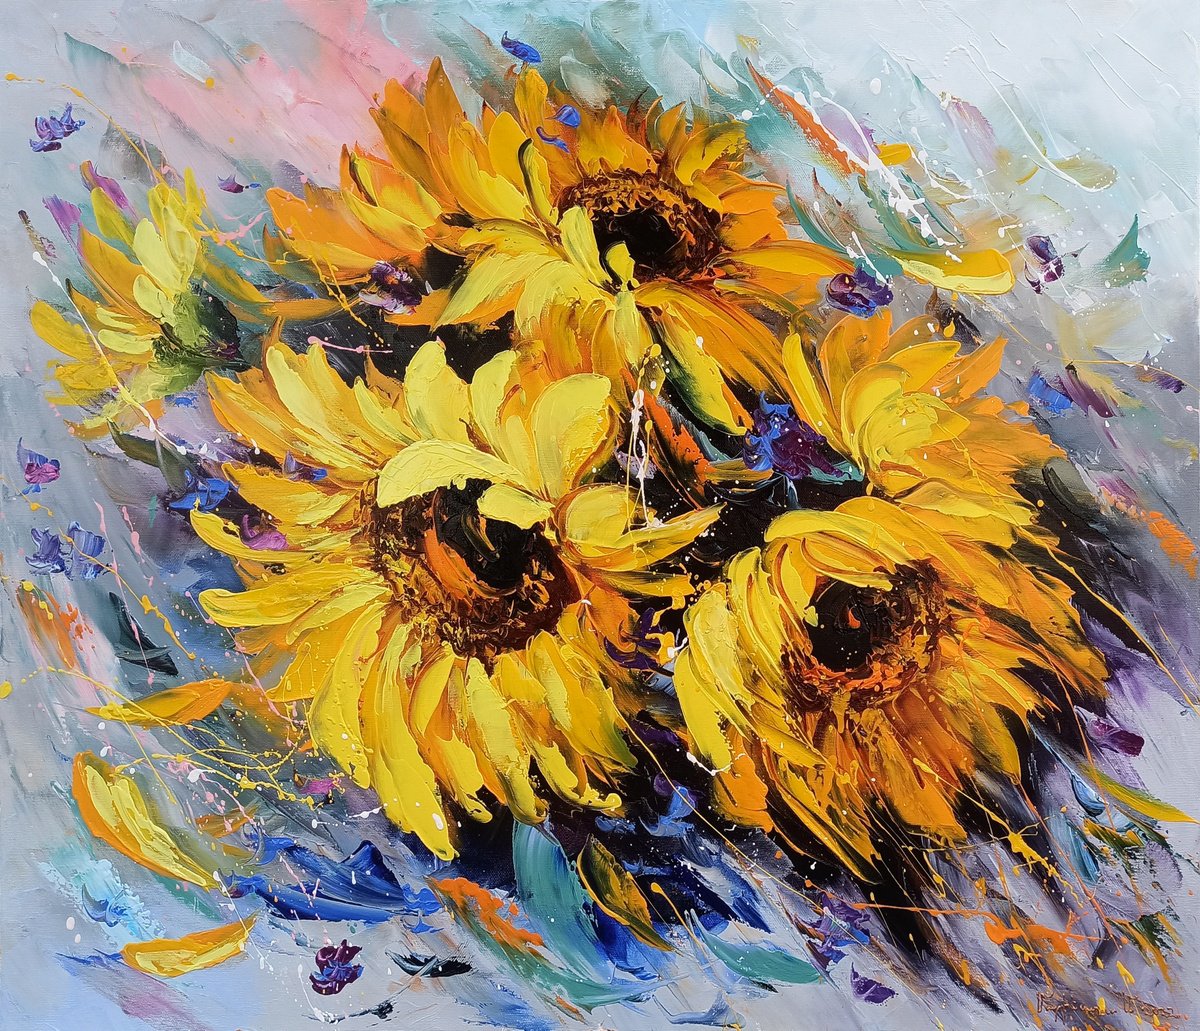 Sunflowers (60x70cm, oil painting, palette knife, ready to hang) by Marieta Martirosyan